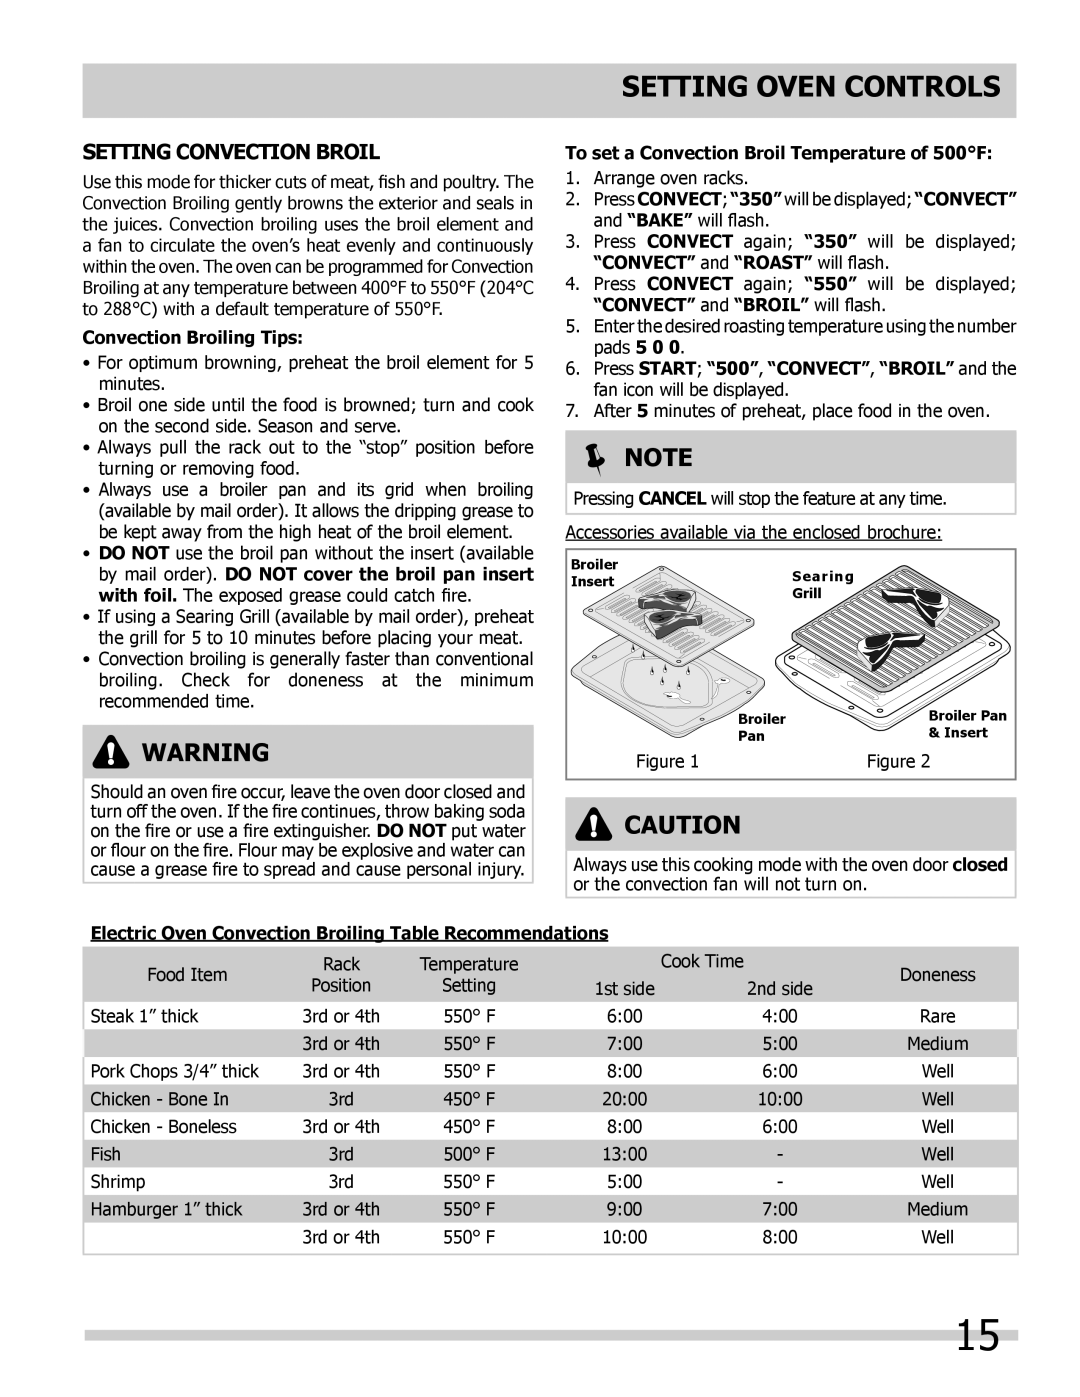 Frigidaire 318205302 manual Setting Convection BROIL, Setting Oven Controls,  Note, Convection Broiling Tips 